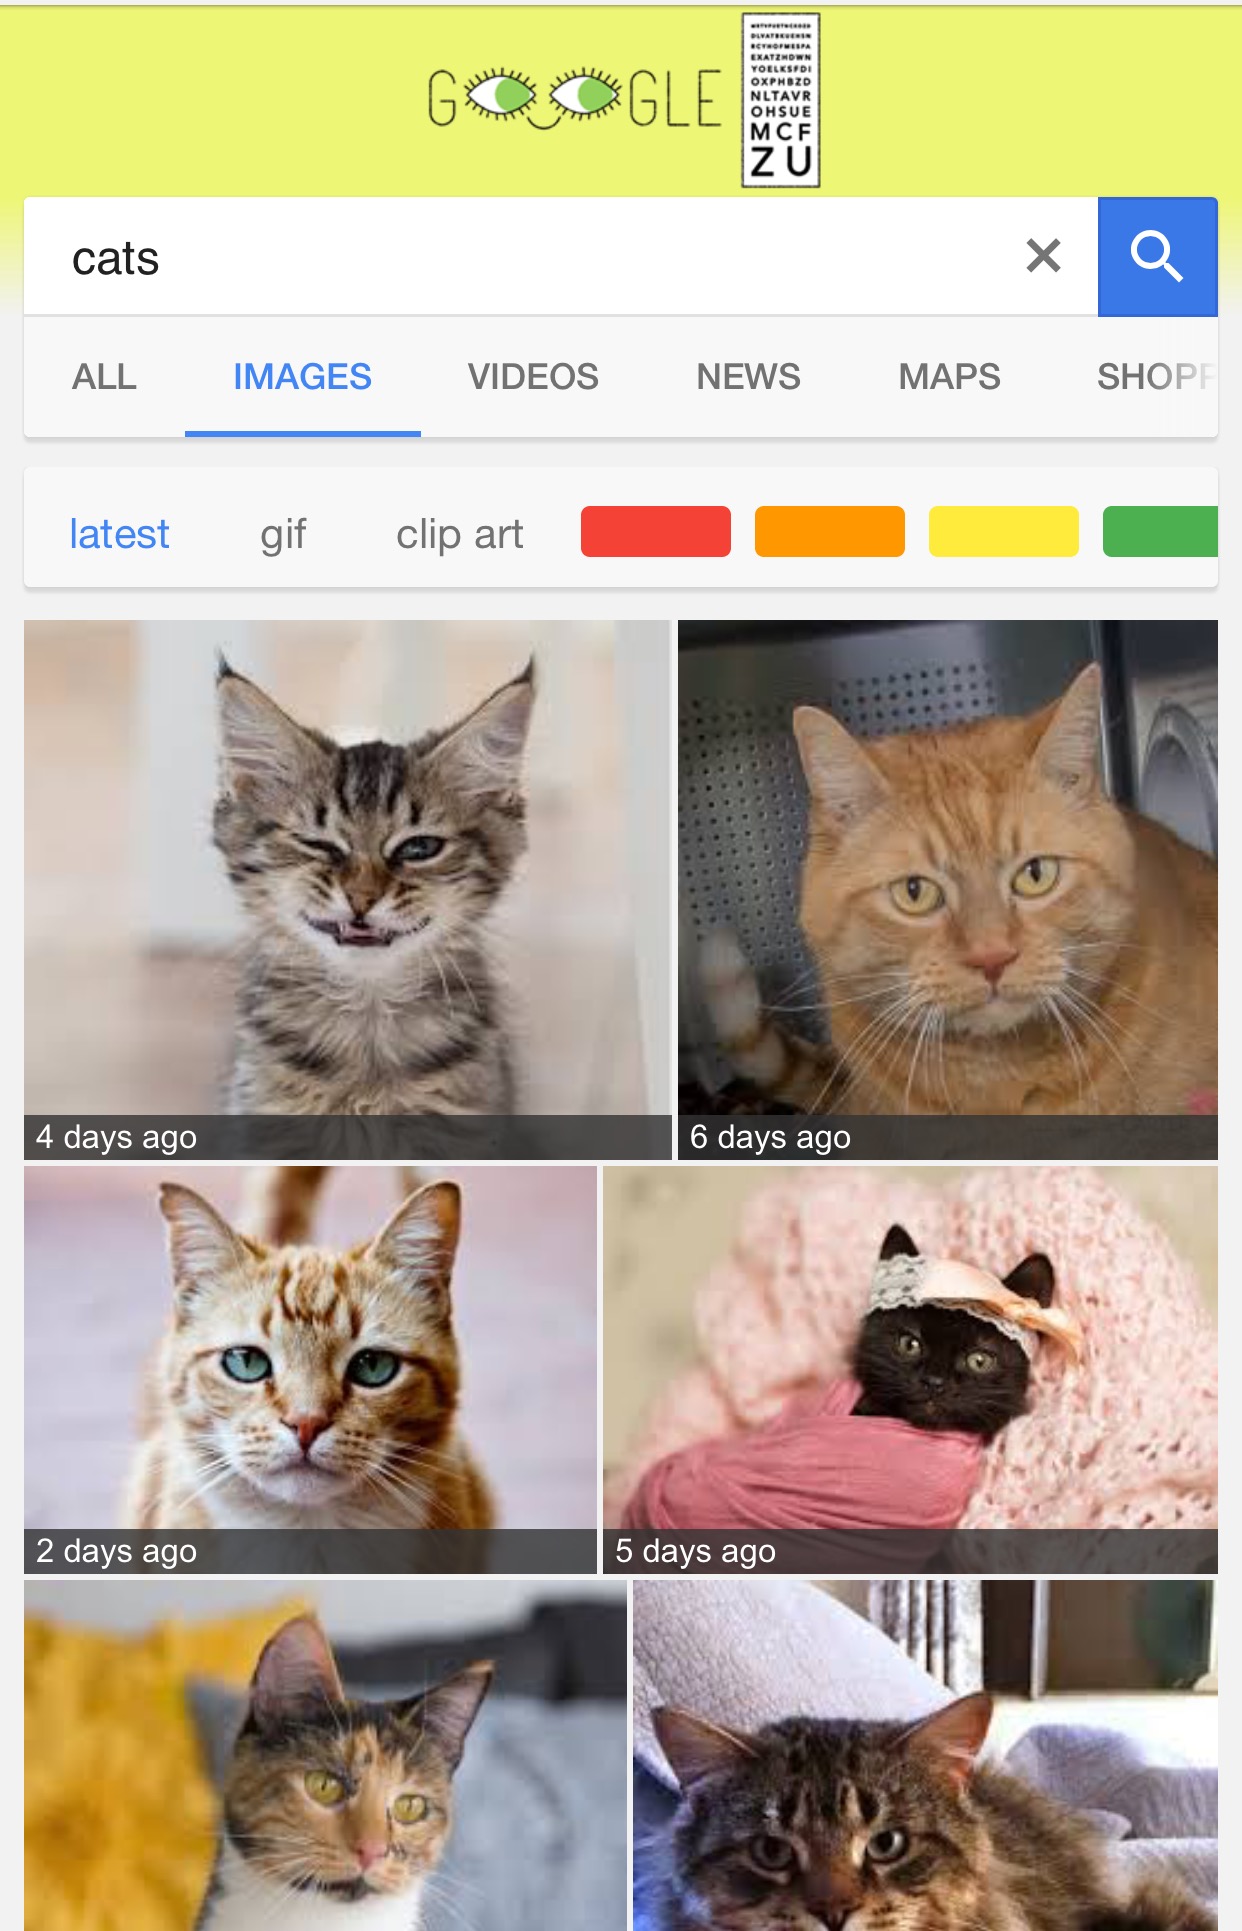 New Filters Added to Google Image Search